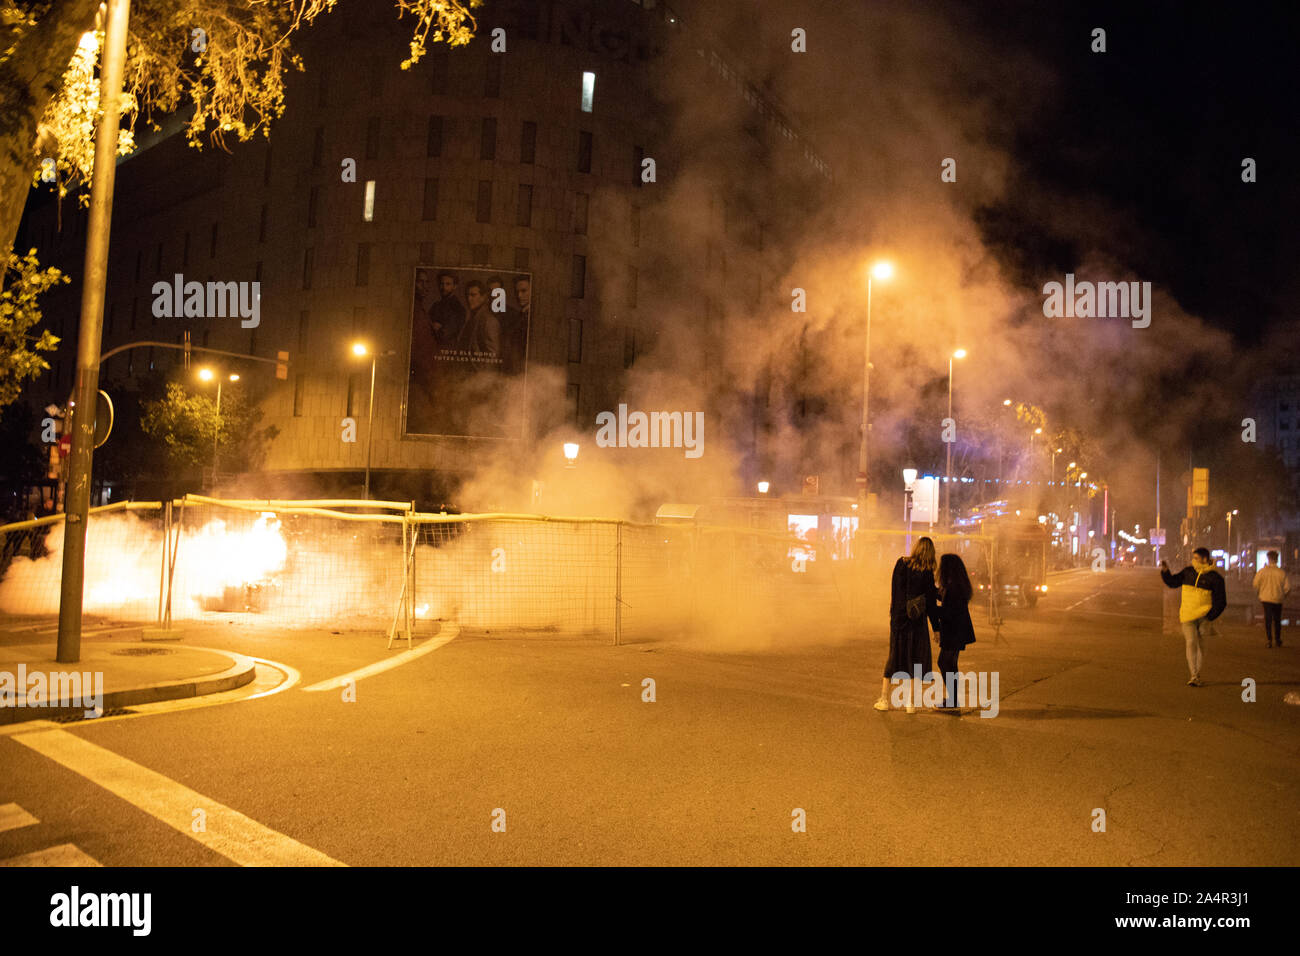 Barcelona, Spain - October 16, 2019:  People looking at the smoke on the main square of Barcelona after a fire has been  turned off. The fire was part of the protests again the prison sentence to catalan leaders for organizing the independence referendum and was aimed to block the main roads of Barcelona's cener Credit: Dino Geromella/Alamy Live News Stock Photo